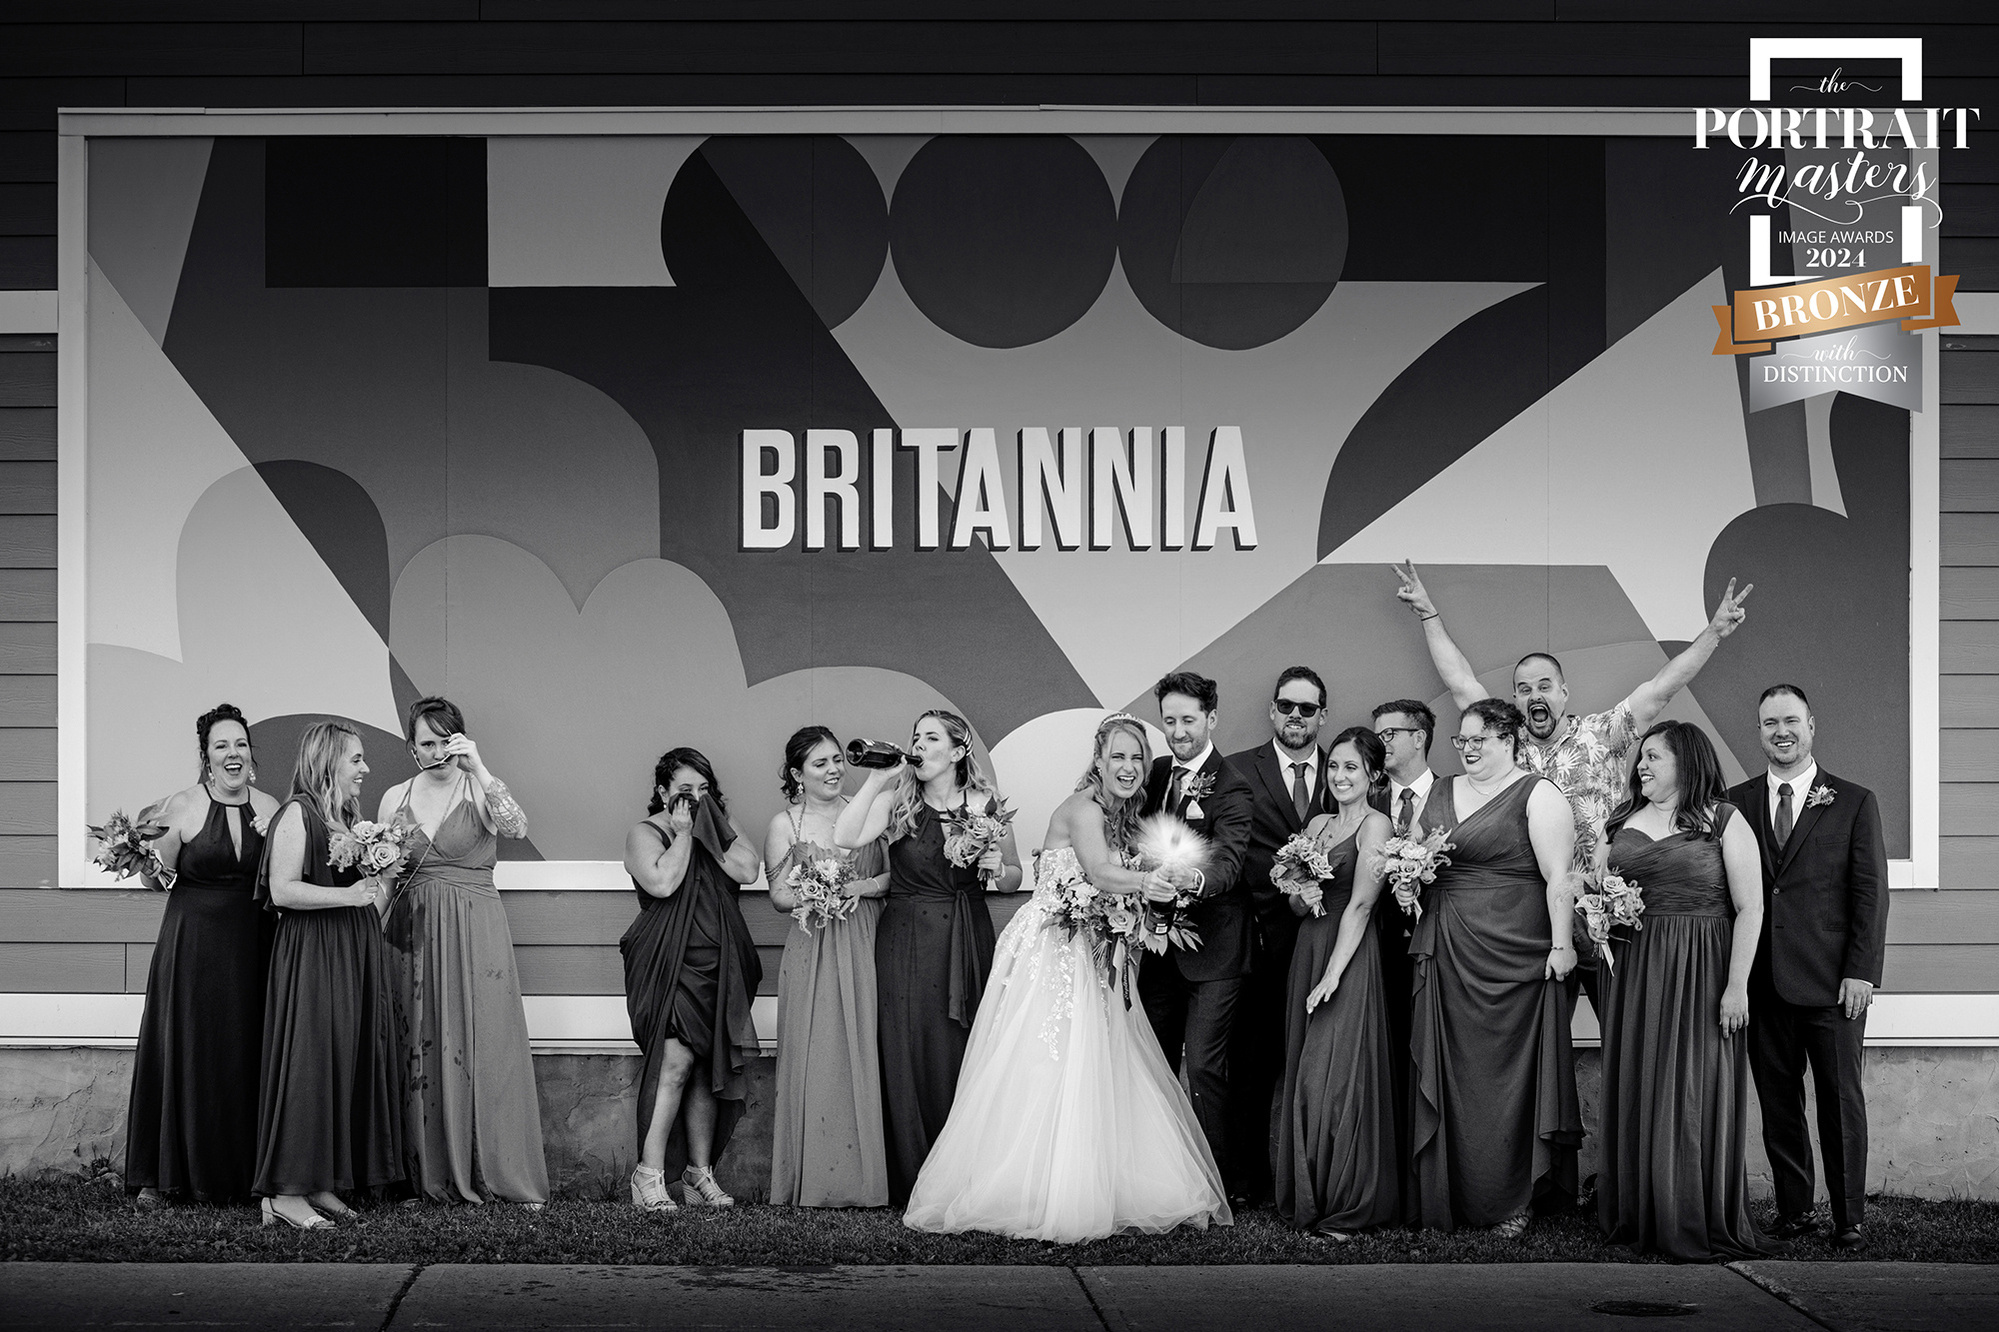 Award winning photograph of couple and bridal party in front of Brittania sign by Frank Fenn